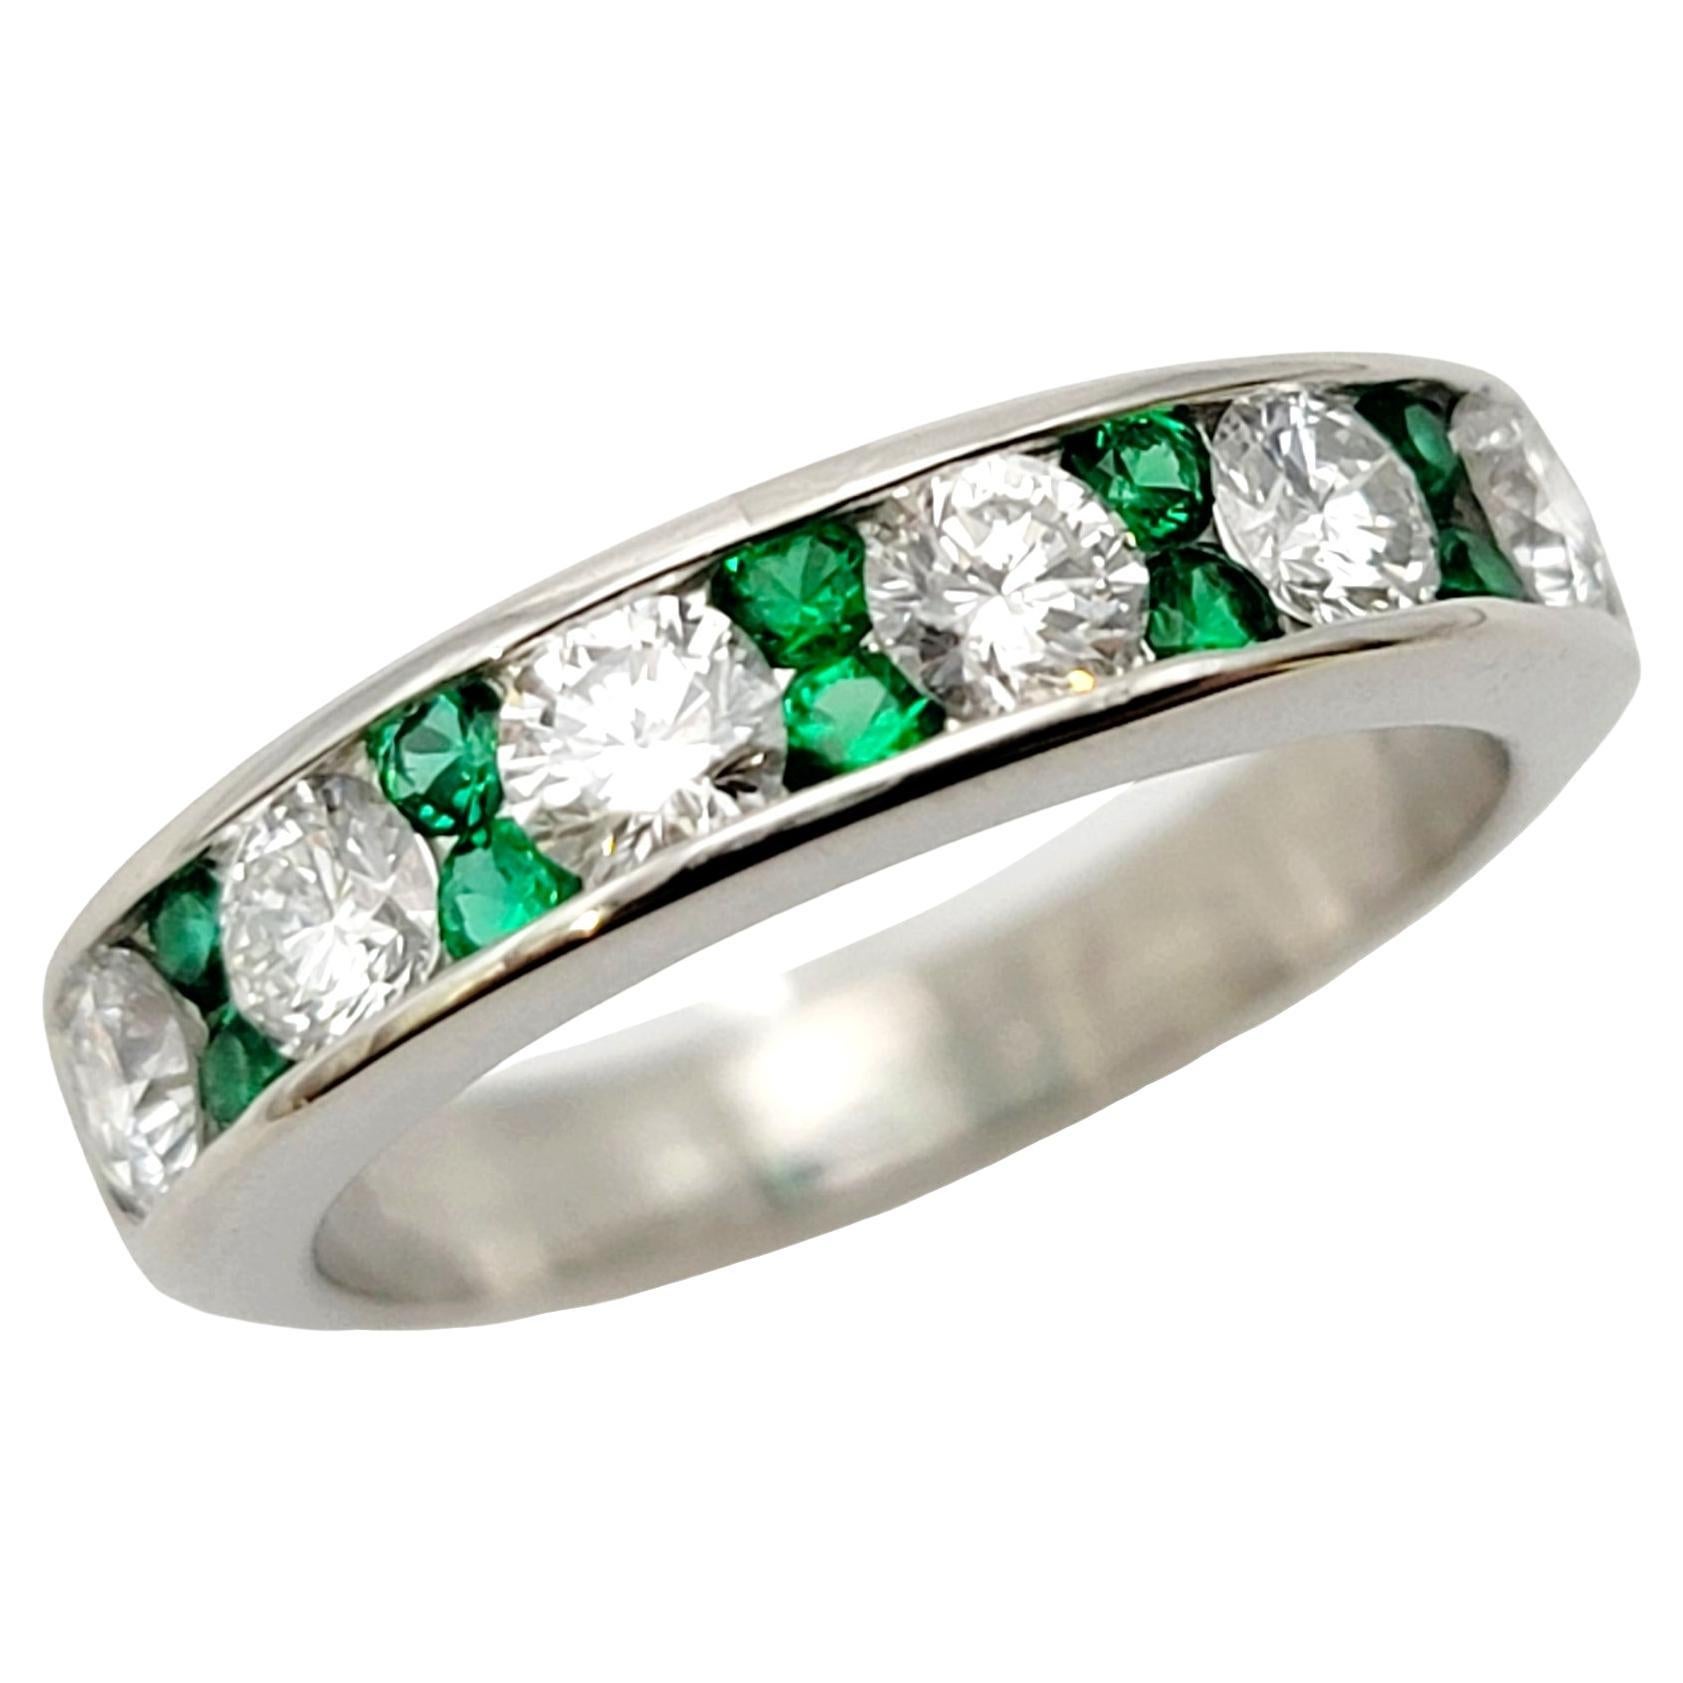 Alternating Diamond and Emerald Semi-Eternity Band Ring in Polished Platinum For Sale